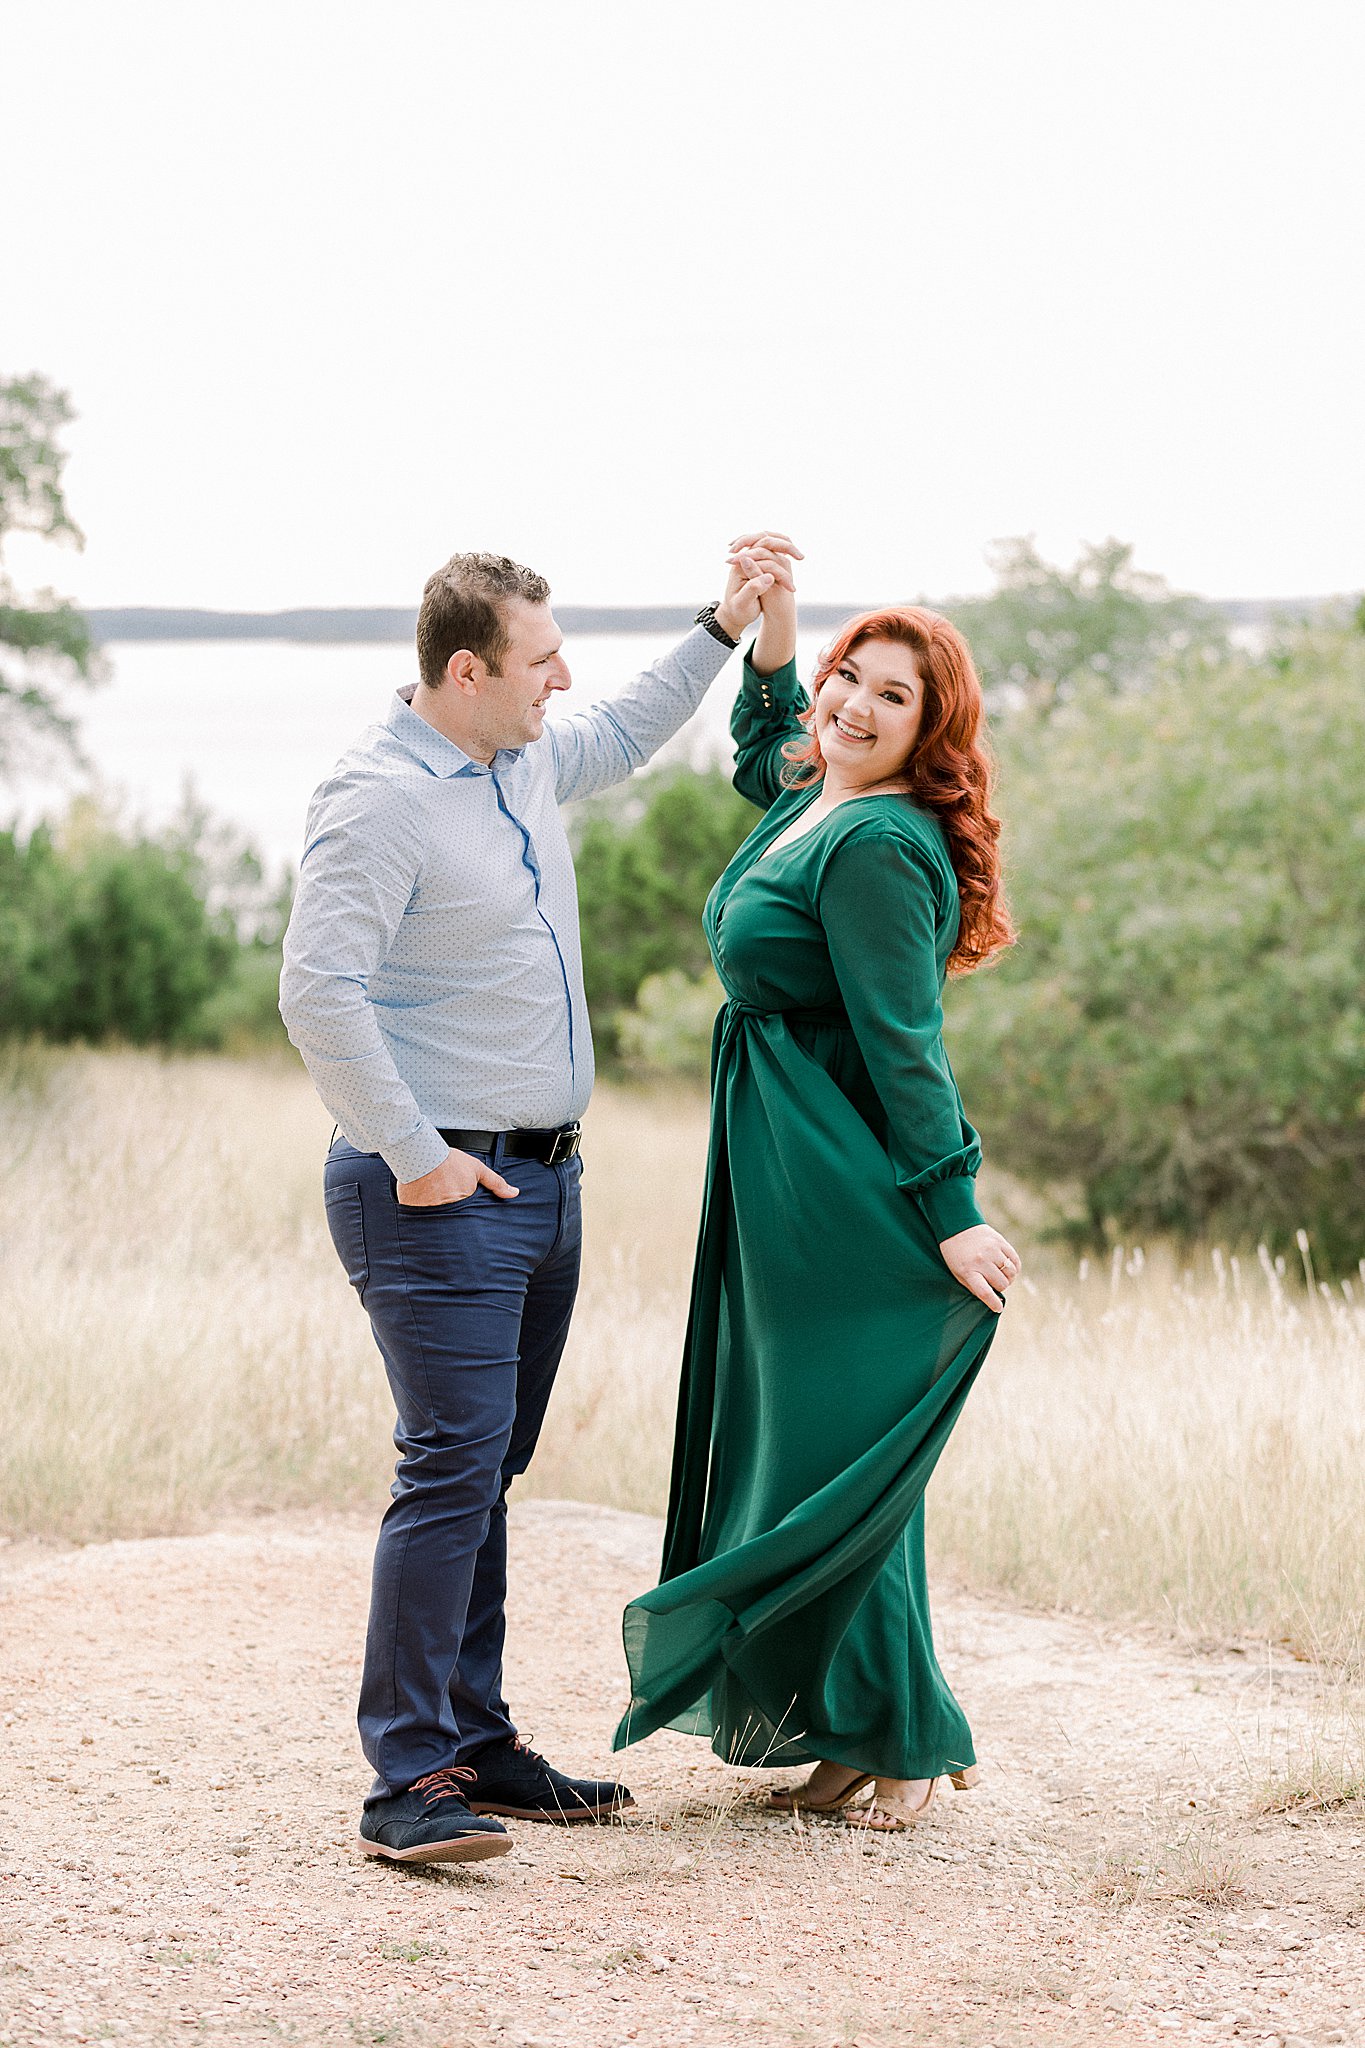 Overlook Park Engagement Session by Anna Kay Photography, Hill Country Wedding Photographer